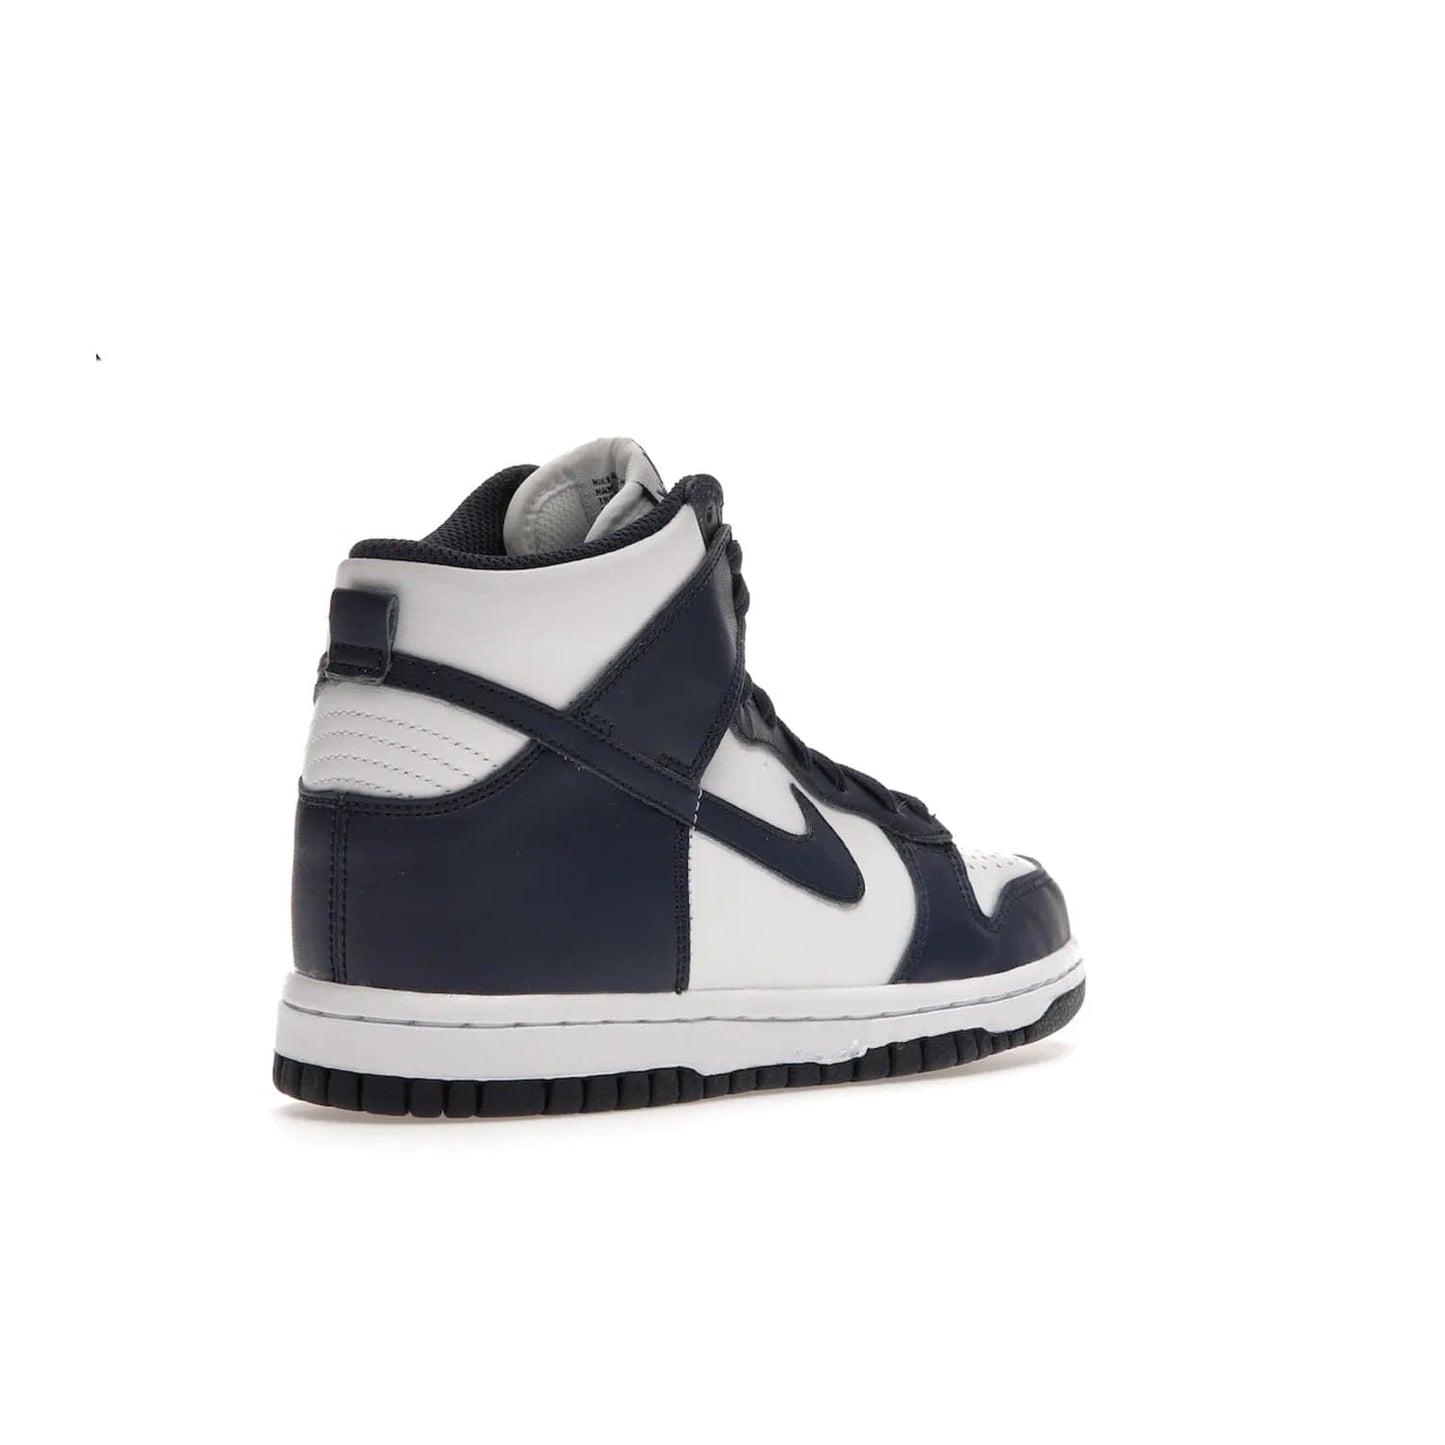 Nike Dunk High Championship Navy (GS) - Image 32 - Only at www.BallersClubKickz.com - Nike Dunk High Championship Navy GS: classic leather, suede, synthetic upper, chunky midsole, rubber herringbone sole. White base overlaid with Midnight Navy for a stylish finish. Padded high-cut collar and signature Nike swoosh design. Step out in these shoes and make a statement. Comfort and style at its finest.